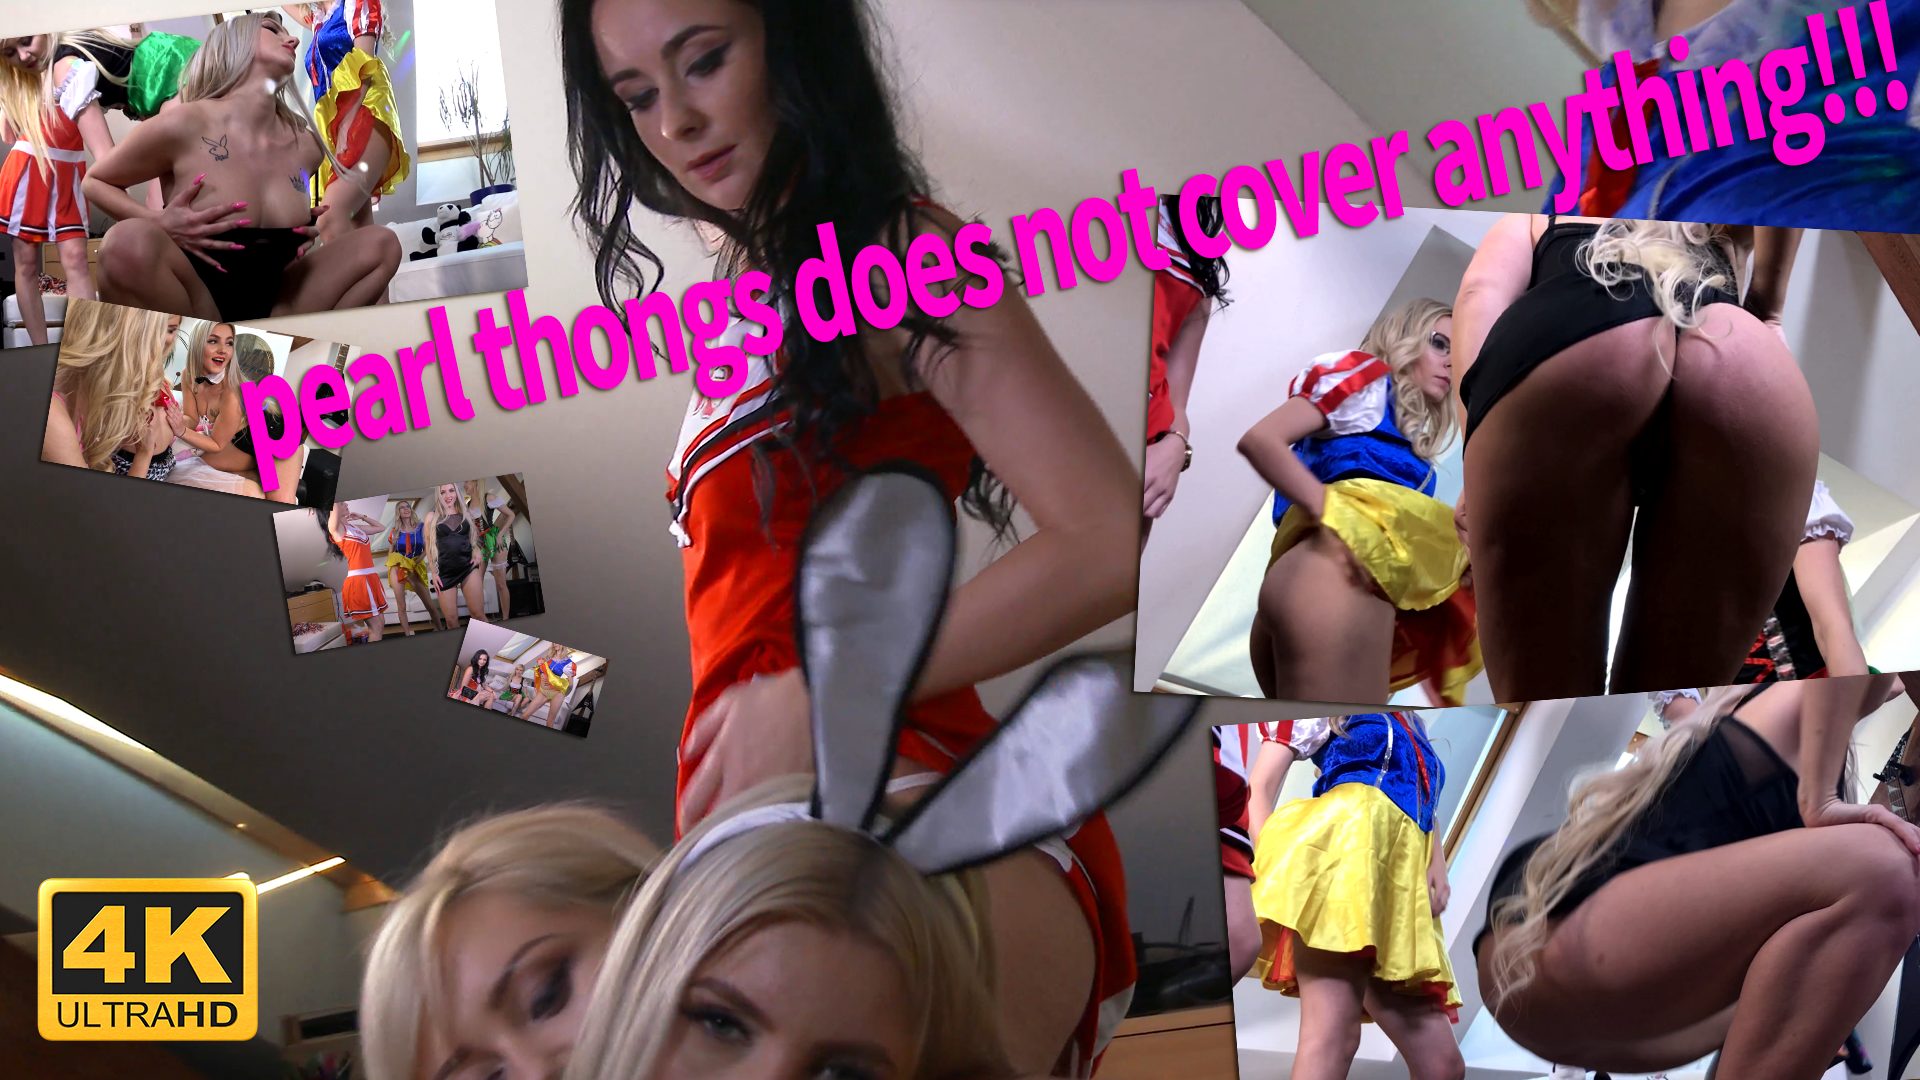 COSPLAY COSTUME PARTY UPSKIRT WEDGIES PARTY with 4 HOT SEXY ROUND